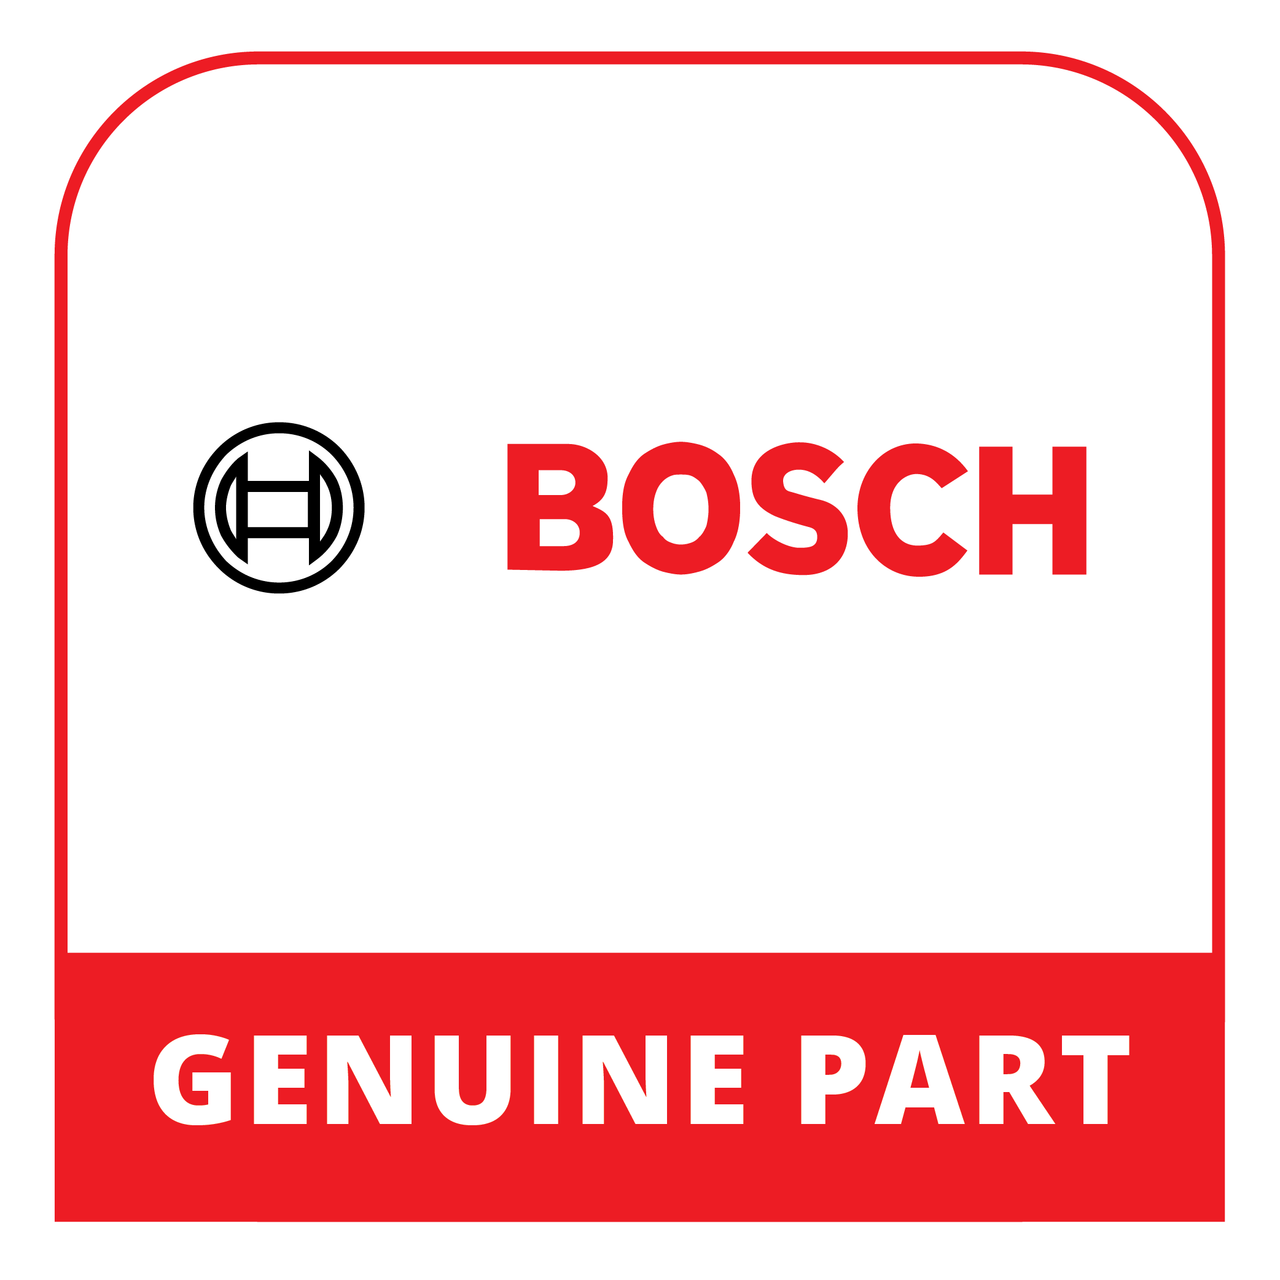 Bosch (Thermador) 11037970 - Guide - Genuine Bosch (Thermador) Part